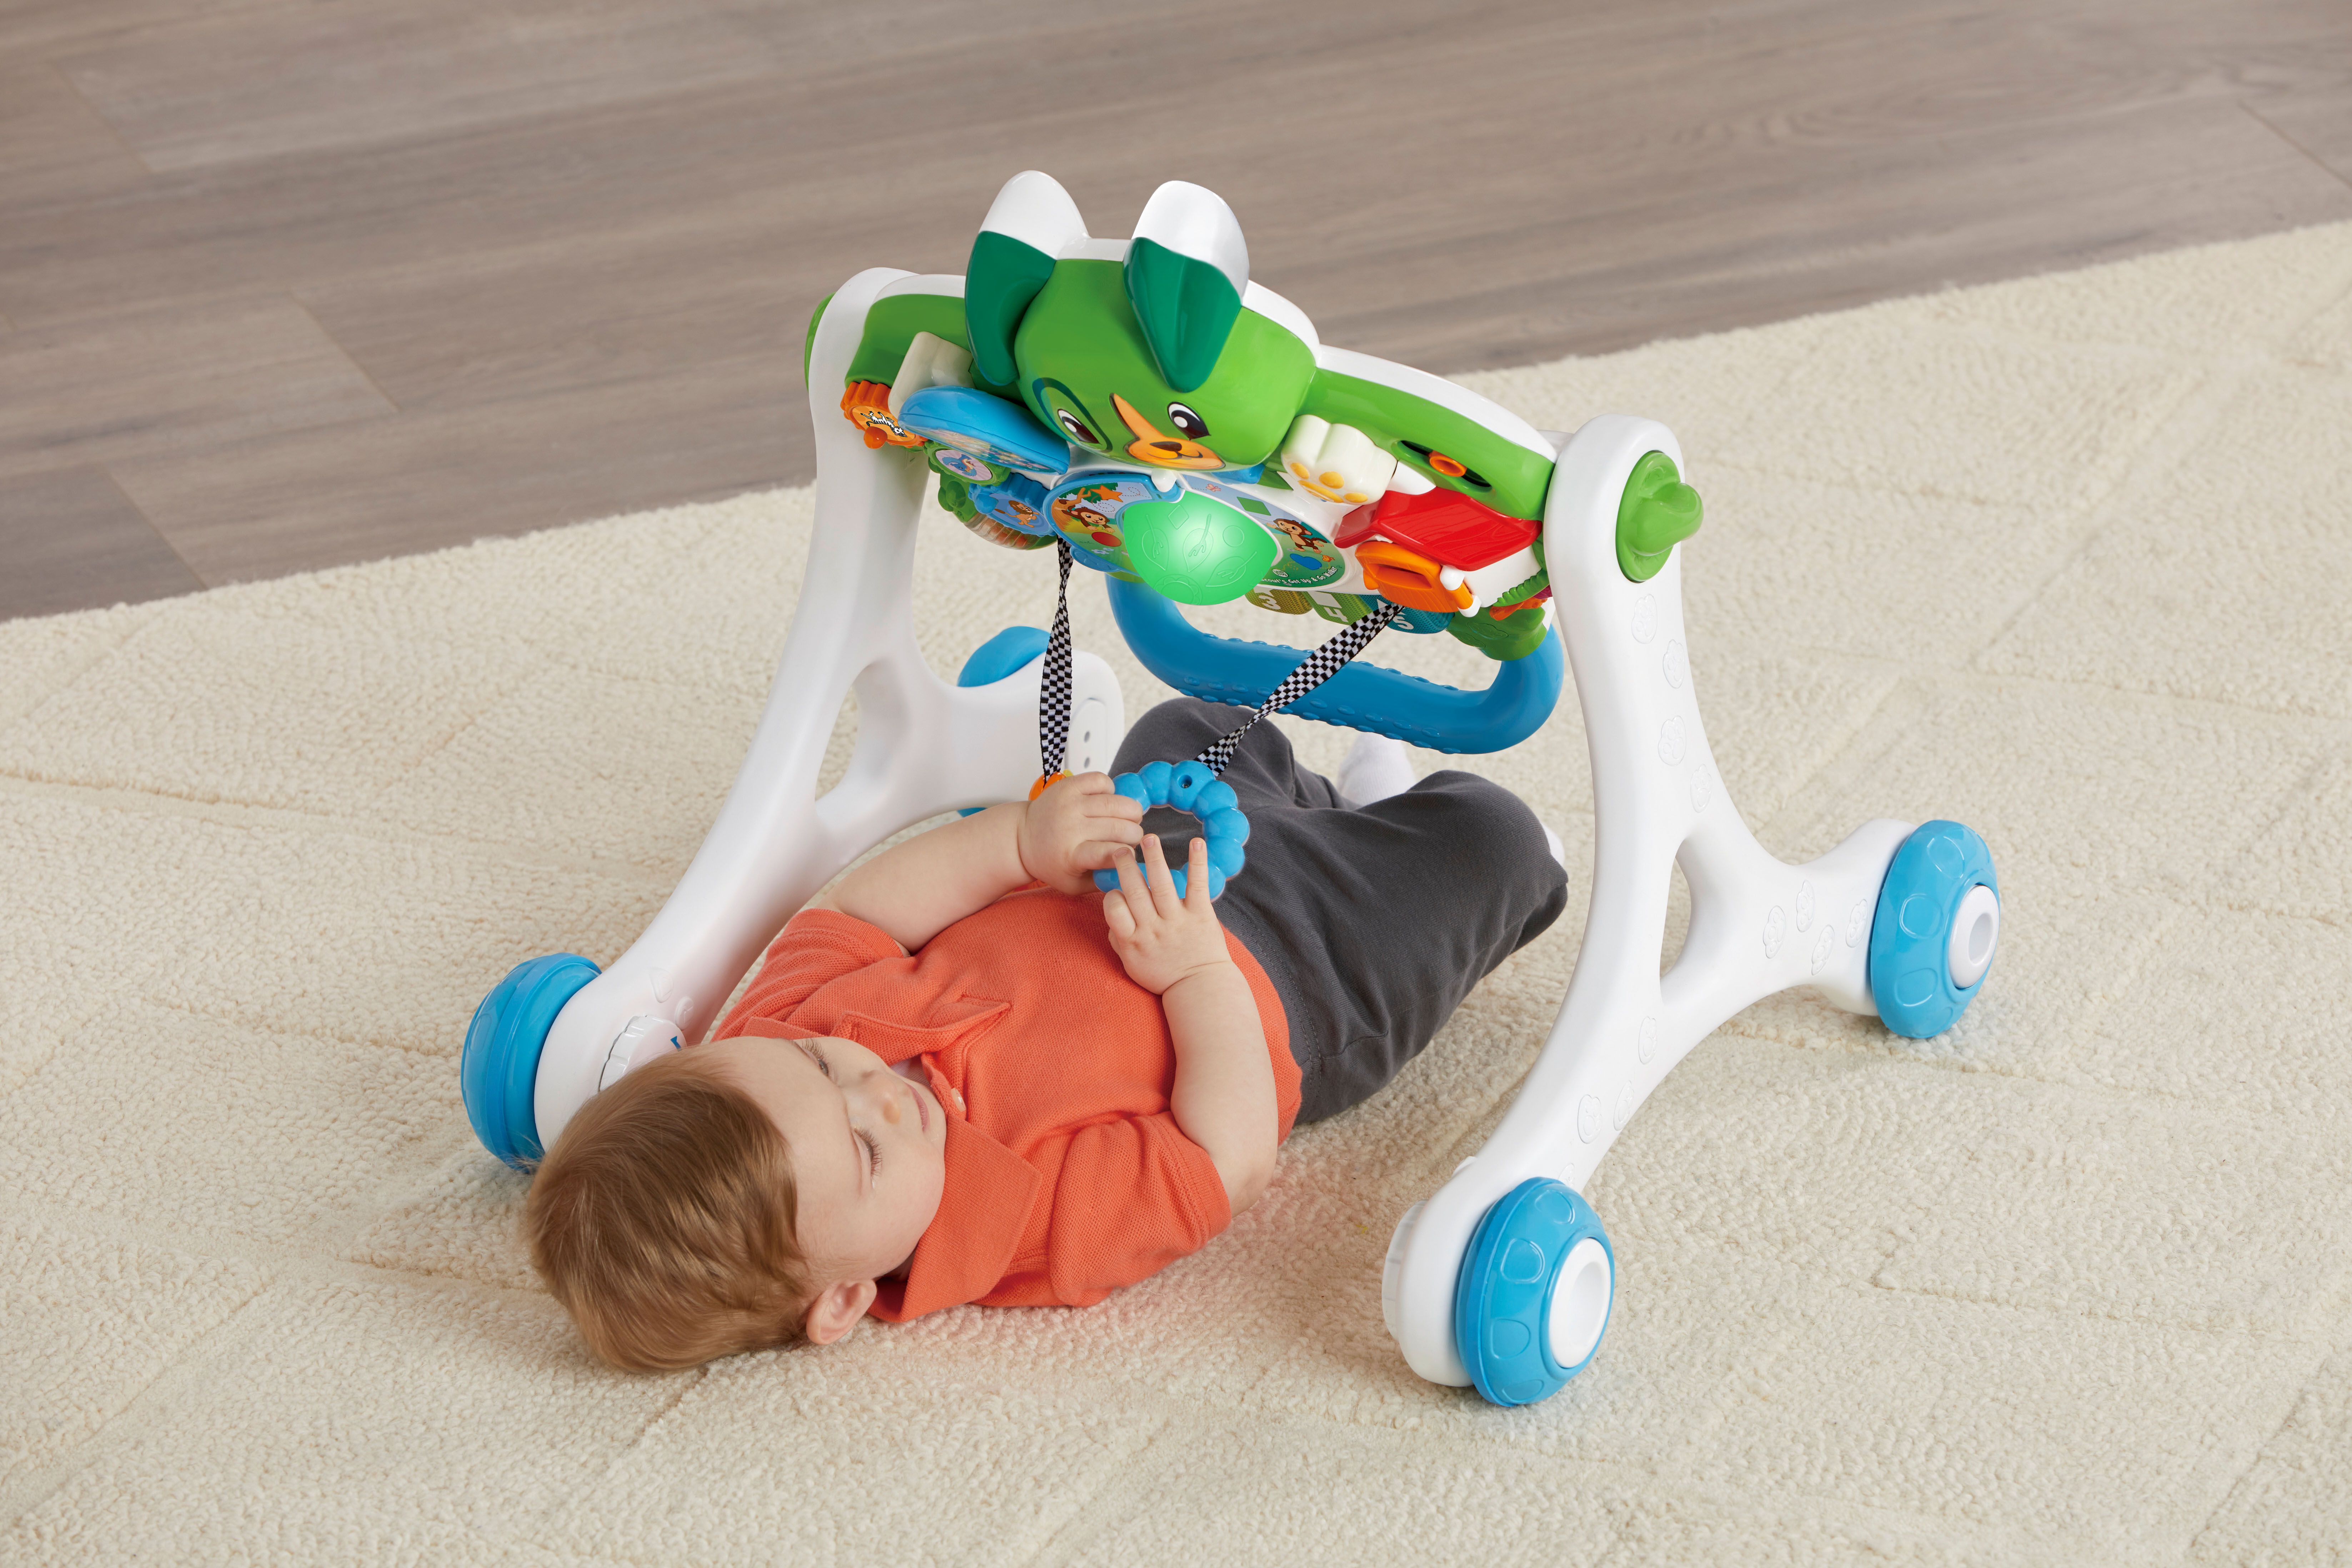 Scout's 3-in-1 Get Up and Go Walker, Baby Gym, Floor Play Toy, Green - image 8 of 11